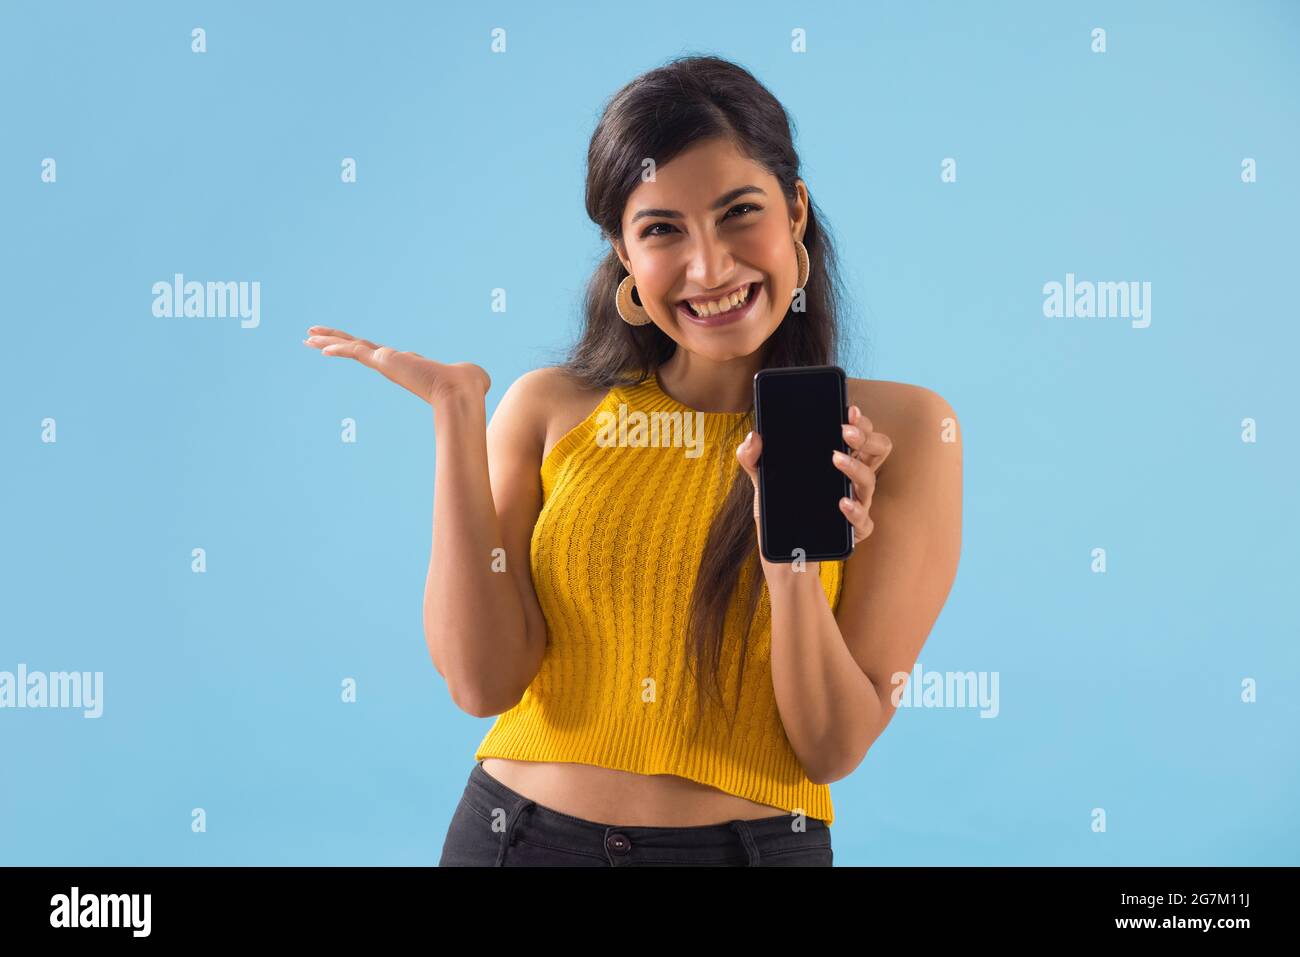 A young woman showing her mobile phone. Stock Photo